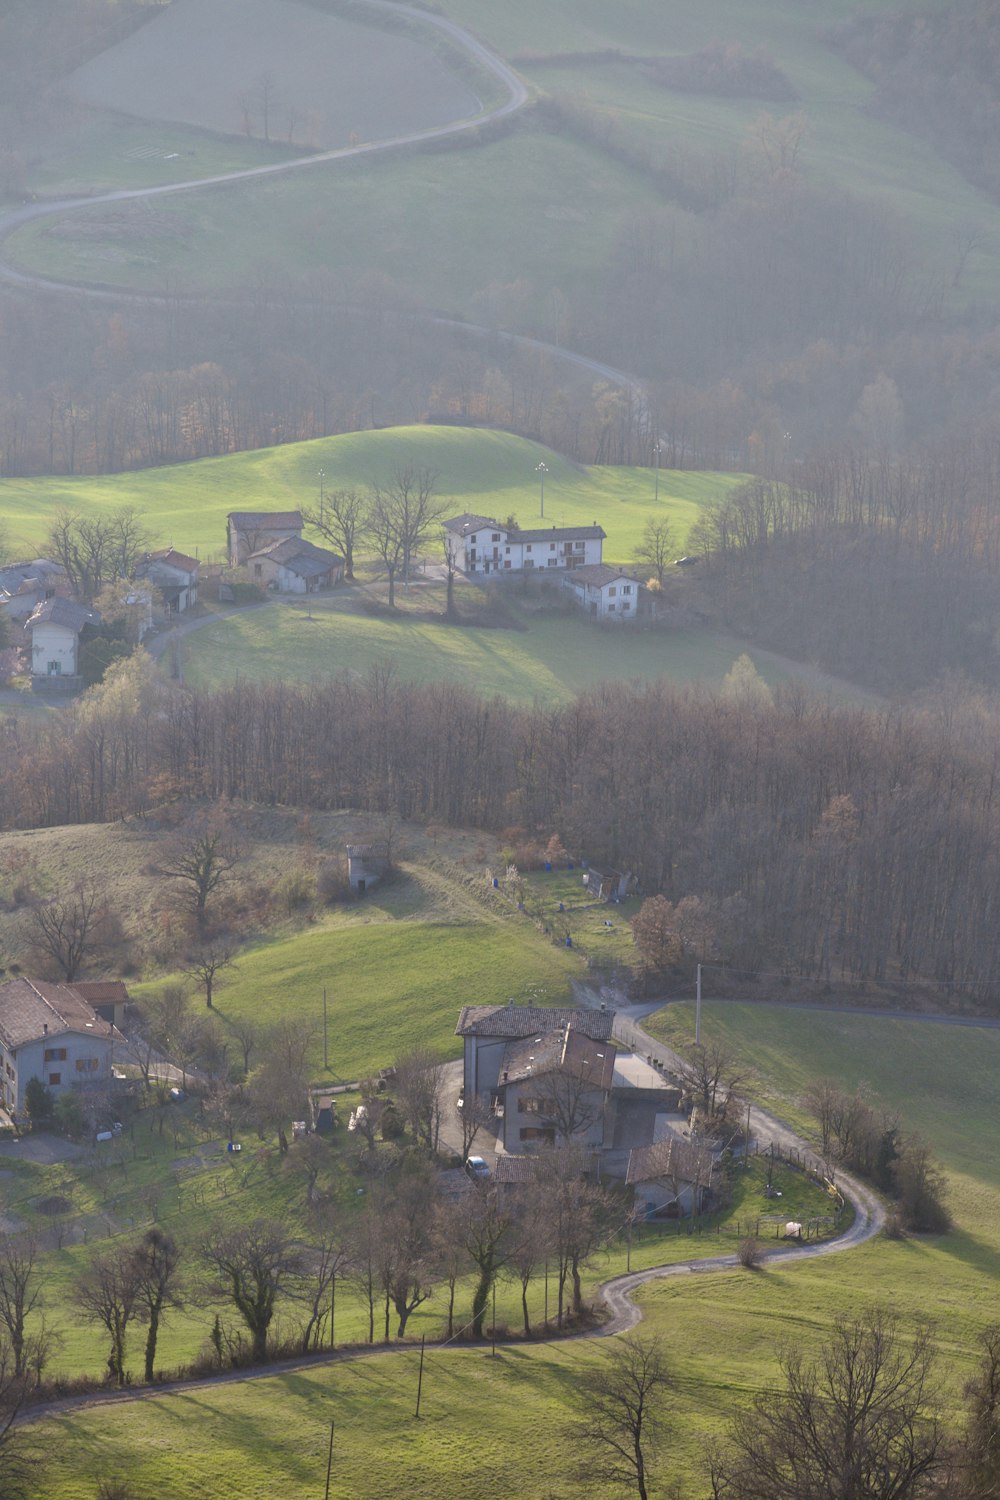 an aerial view of a rural area with houses